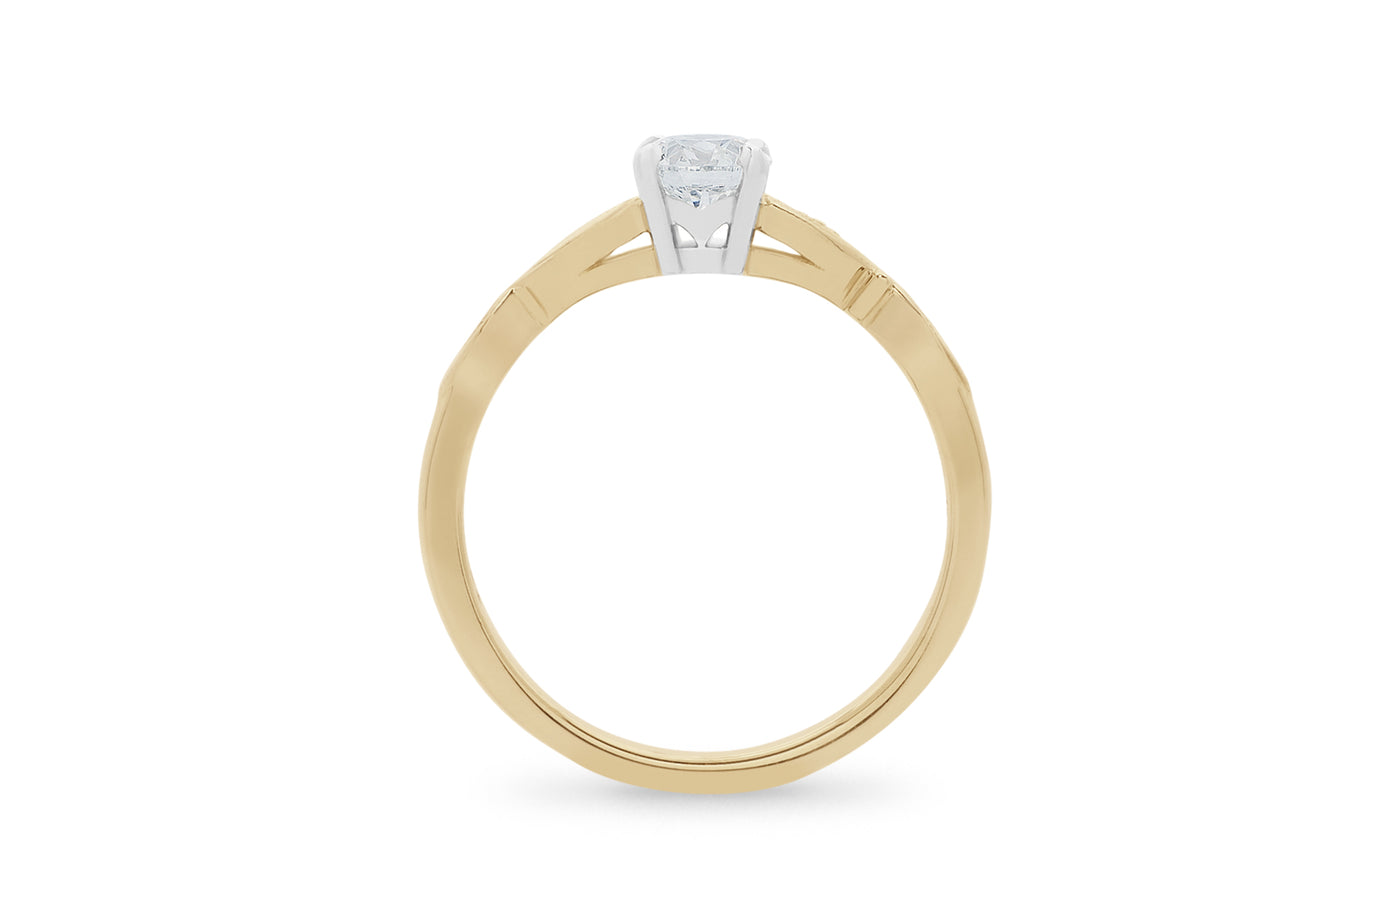 Narrative Collection, Maori, Polynesian, Celtic,  specialist, jewelry, jewellery, ring design, diamond, carat, carats, engagement ring, intertwining band, solitaire engagement ring, round cut, brilliant cut, diamond band, millgrain edge, 18K, 18ct yellow gold, platinum setting, tale 